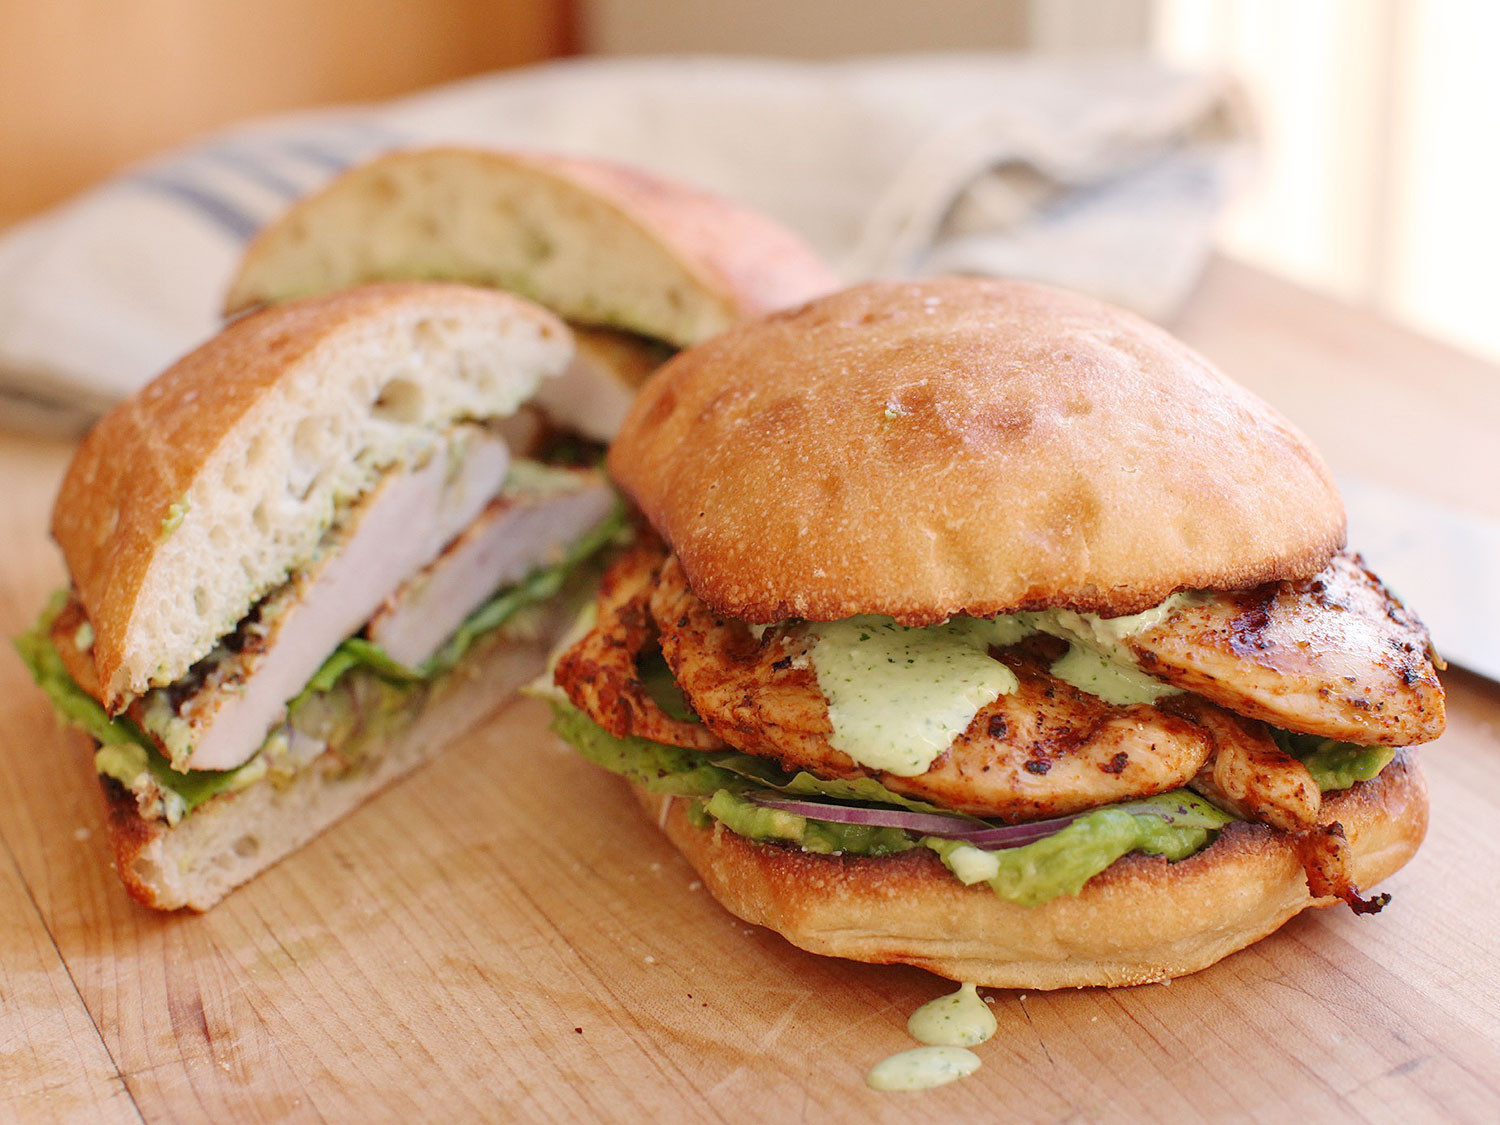 Barbecued Chicken Sandwiches
 Make Peruvian Grilled Chicken Portable With These Tasty